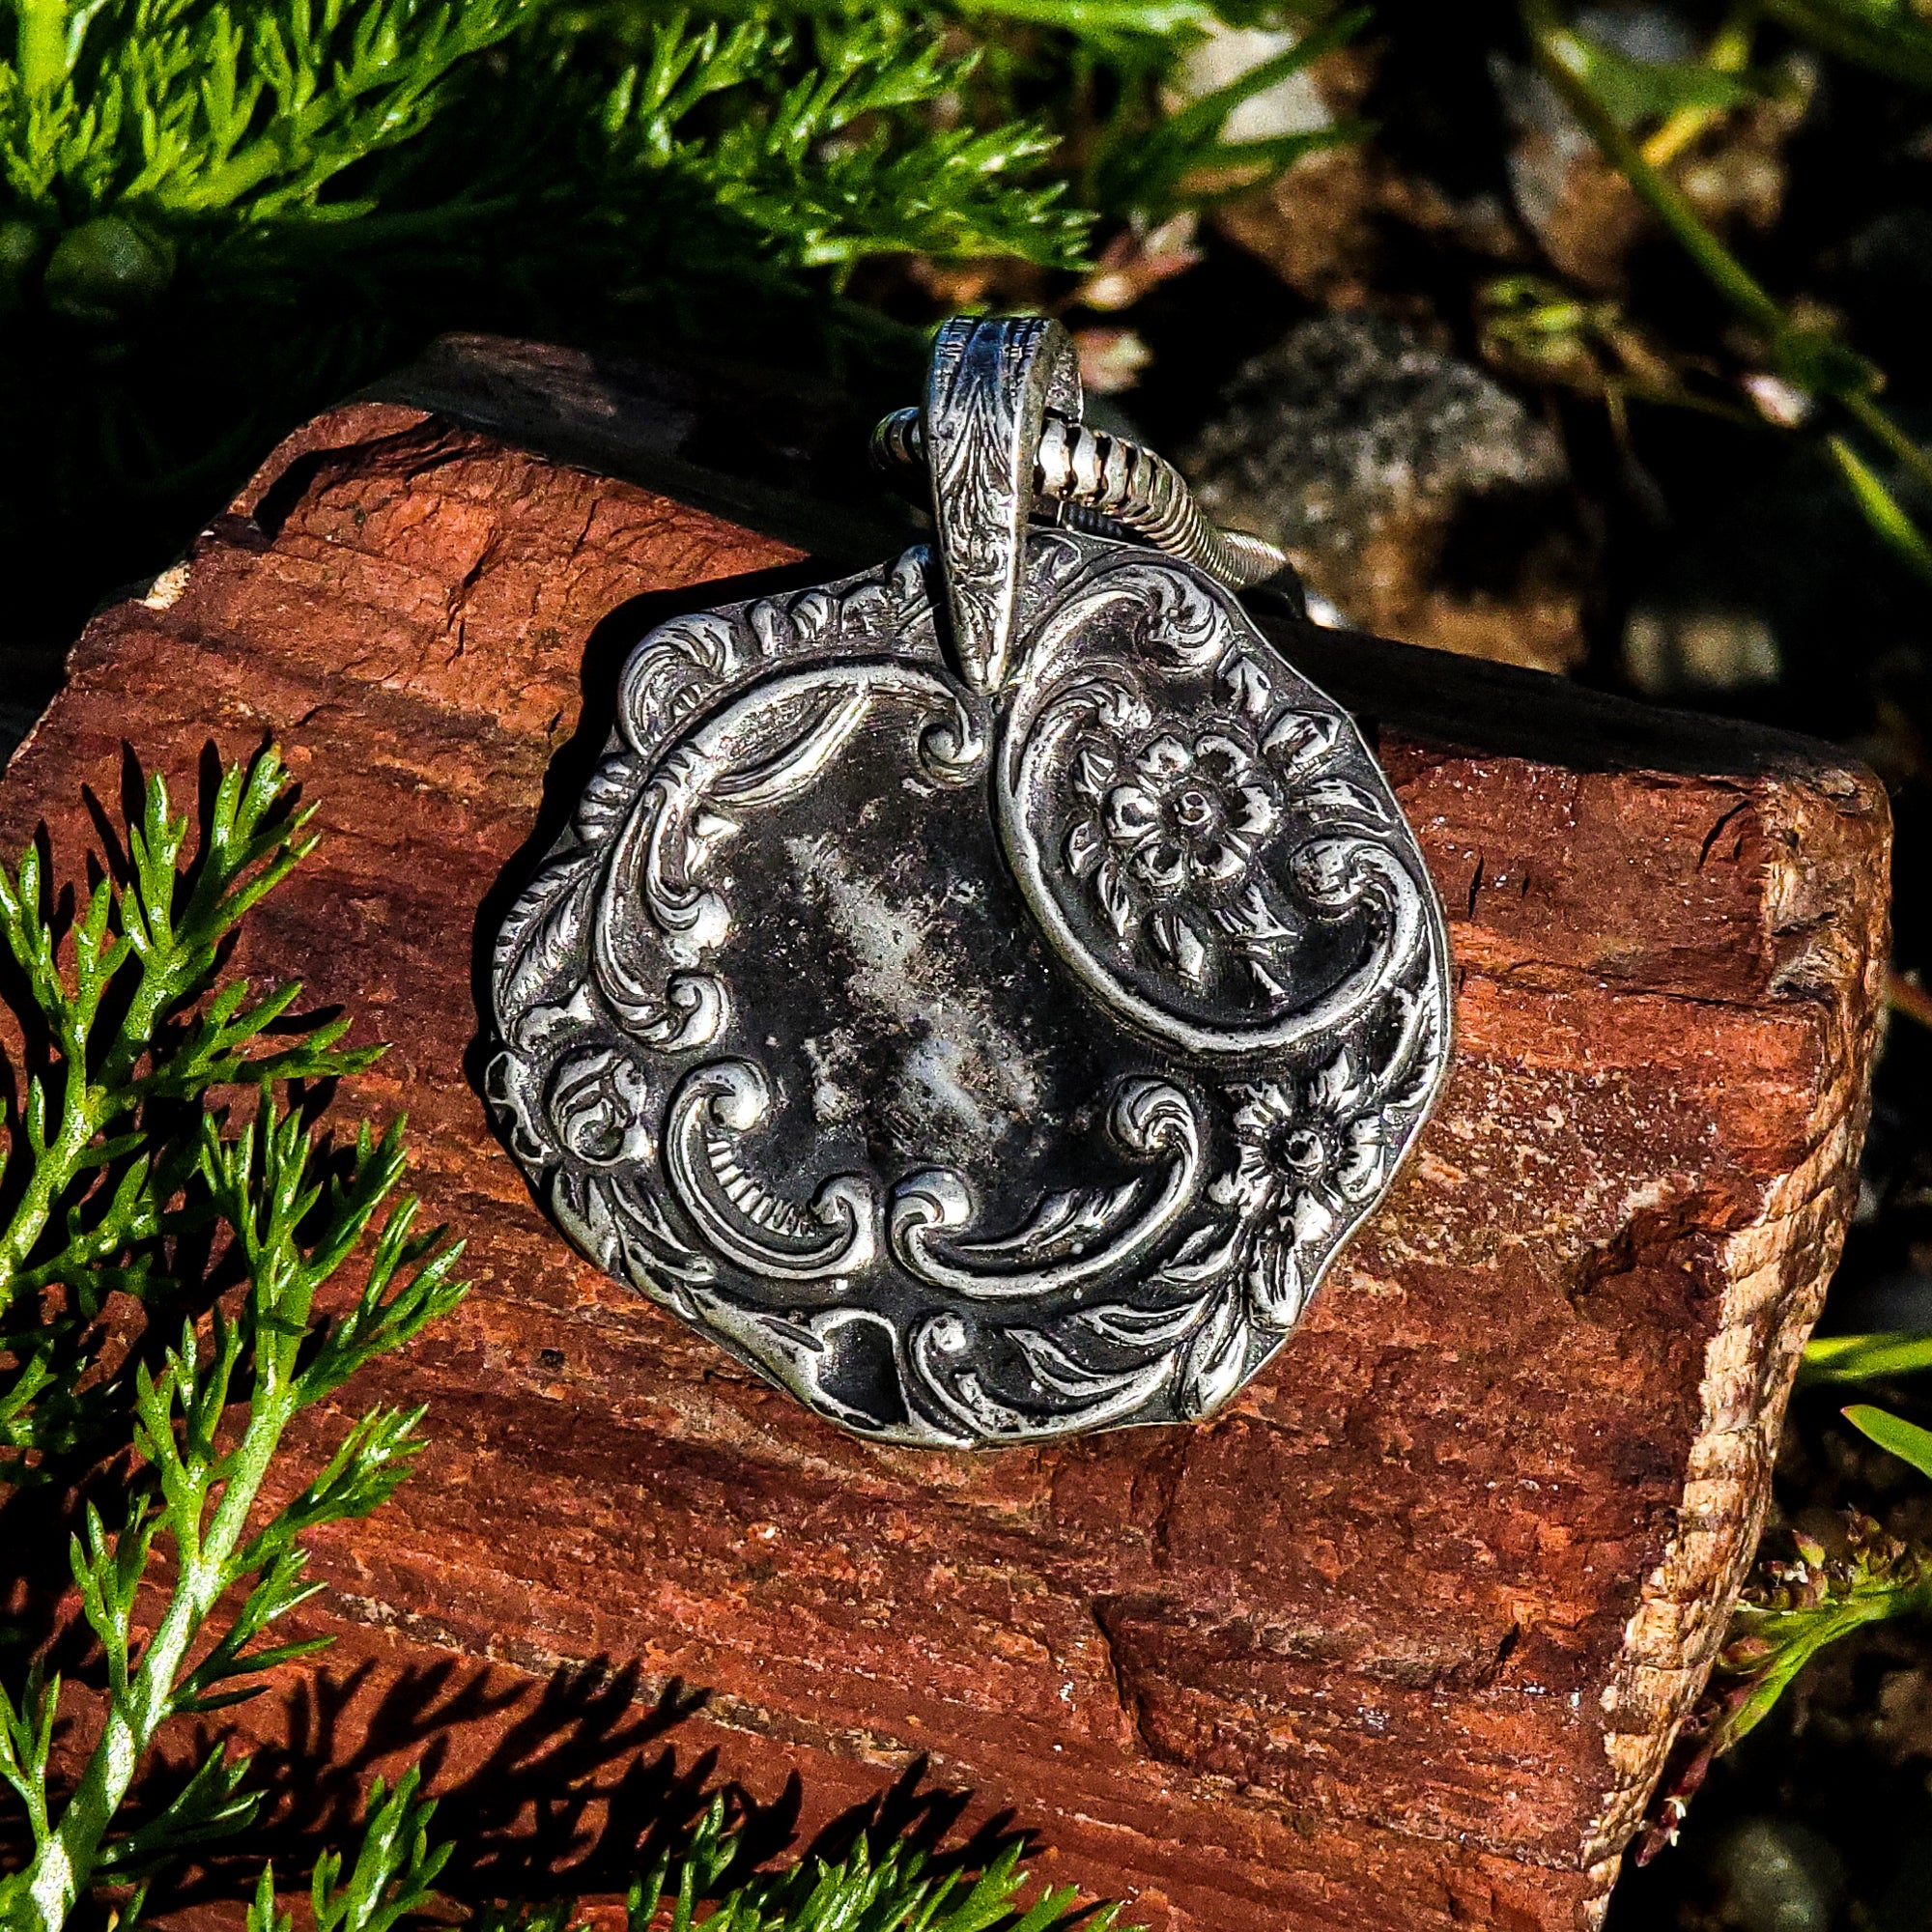 Our Art Nouveau Garden of Silver pendant evokes the wild beauty of a garden. The intricate wreath design features organic shapes and textures of flowers and vines made from sterling silver, with a unique tarnished finish that brings out the detailing